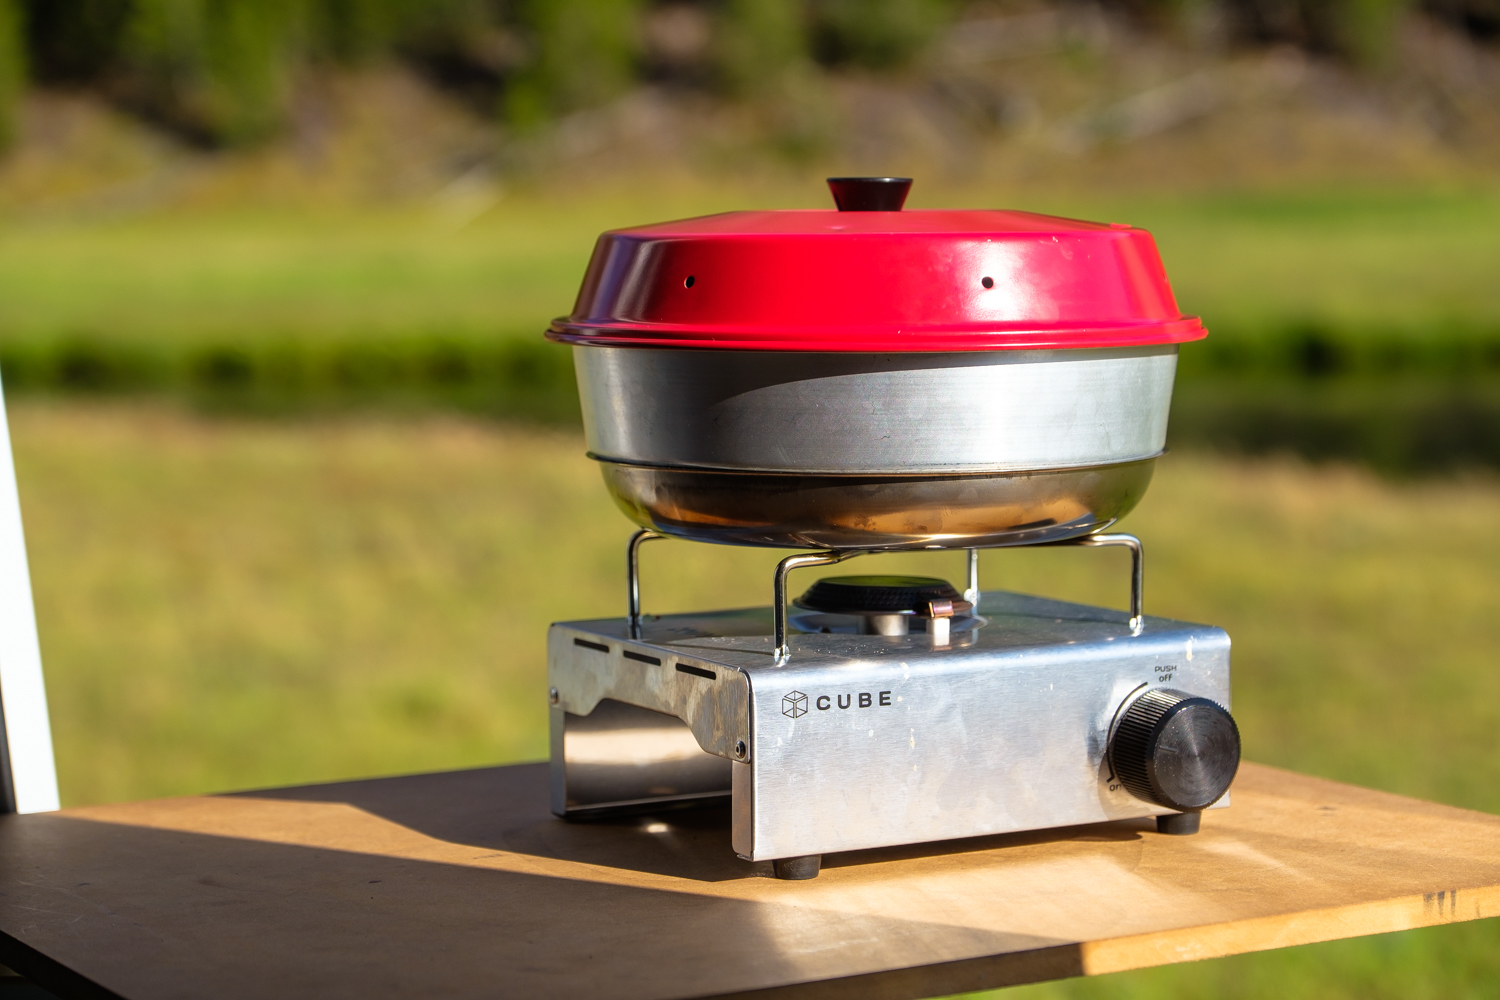 Omnia Oven: The Ultimate Camping Oven - Fresh Off The Grid